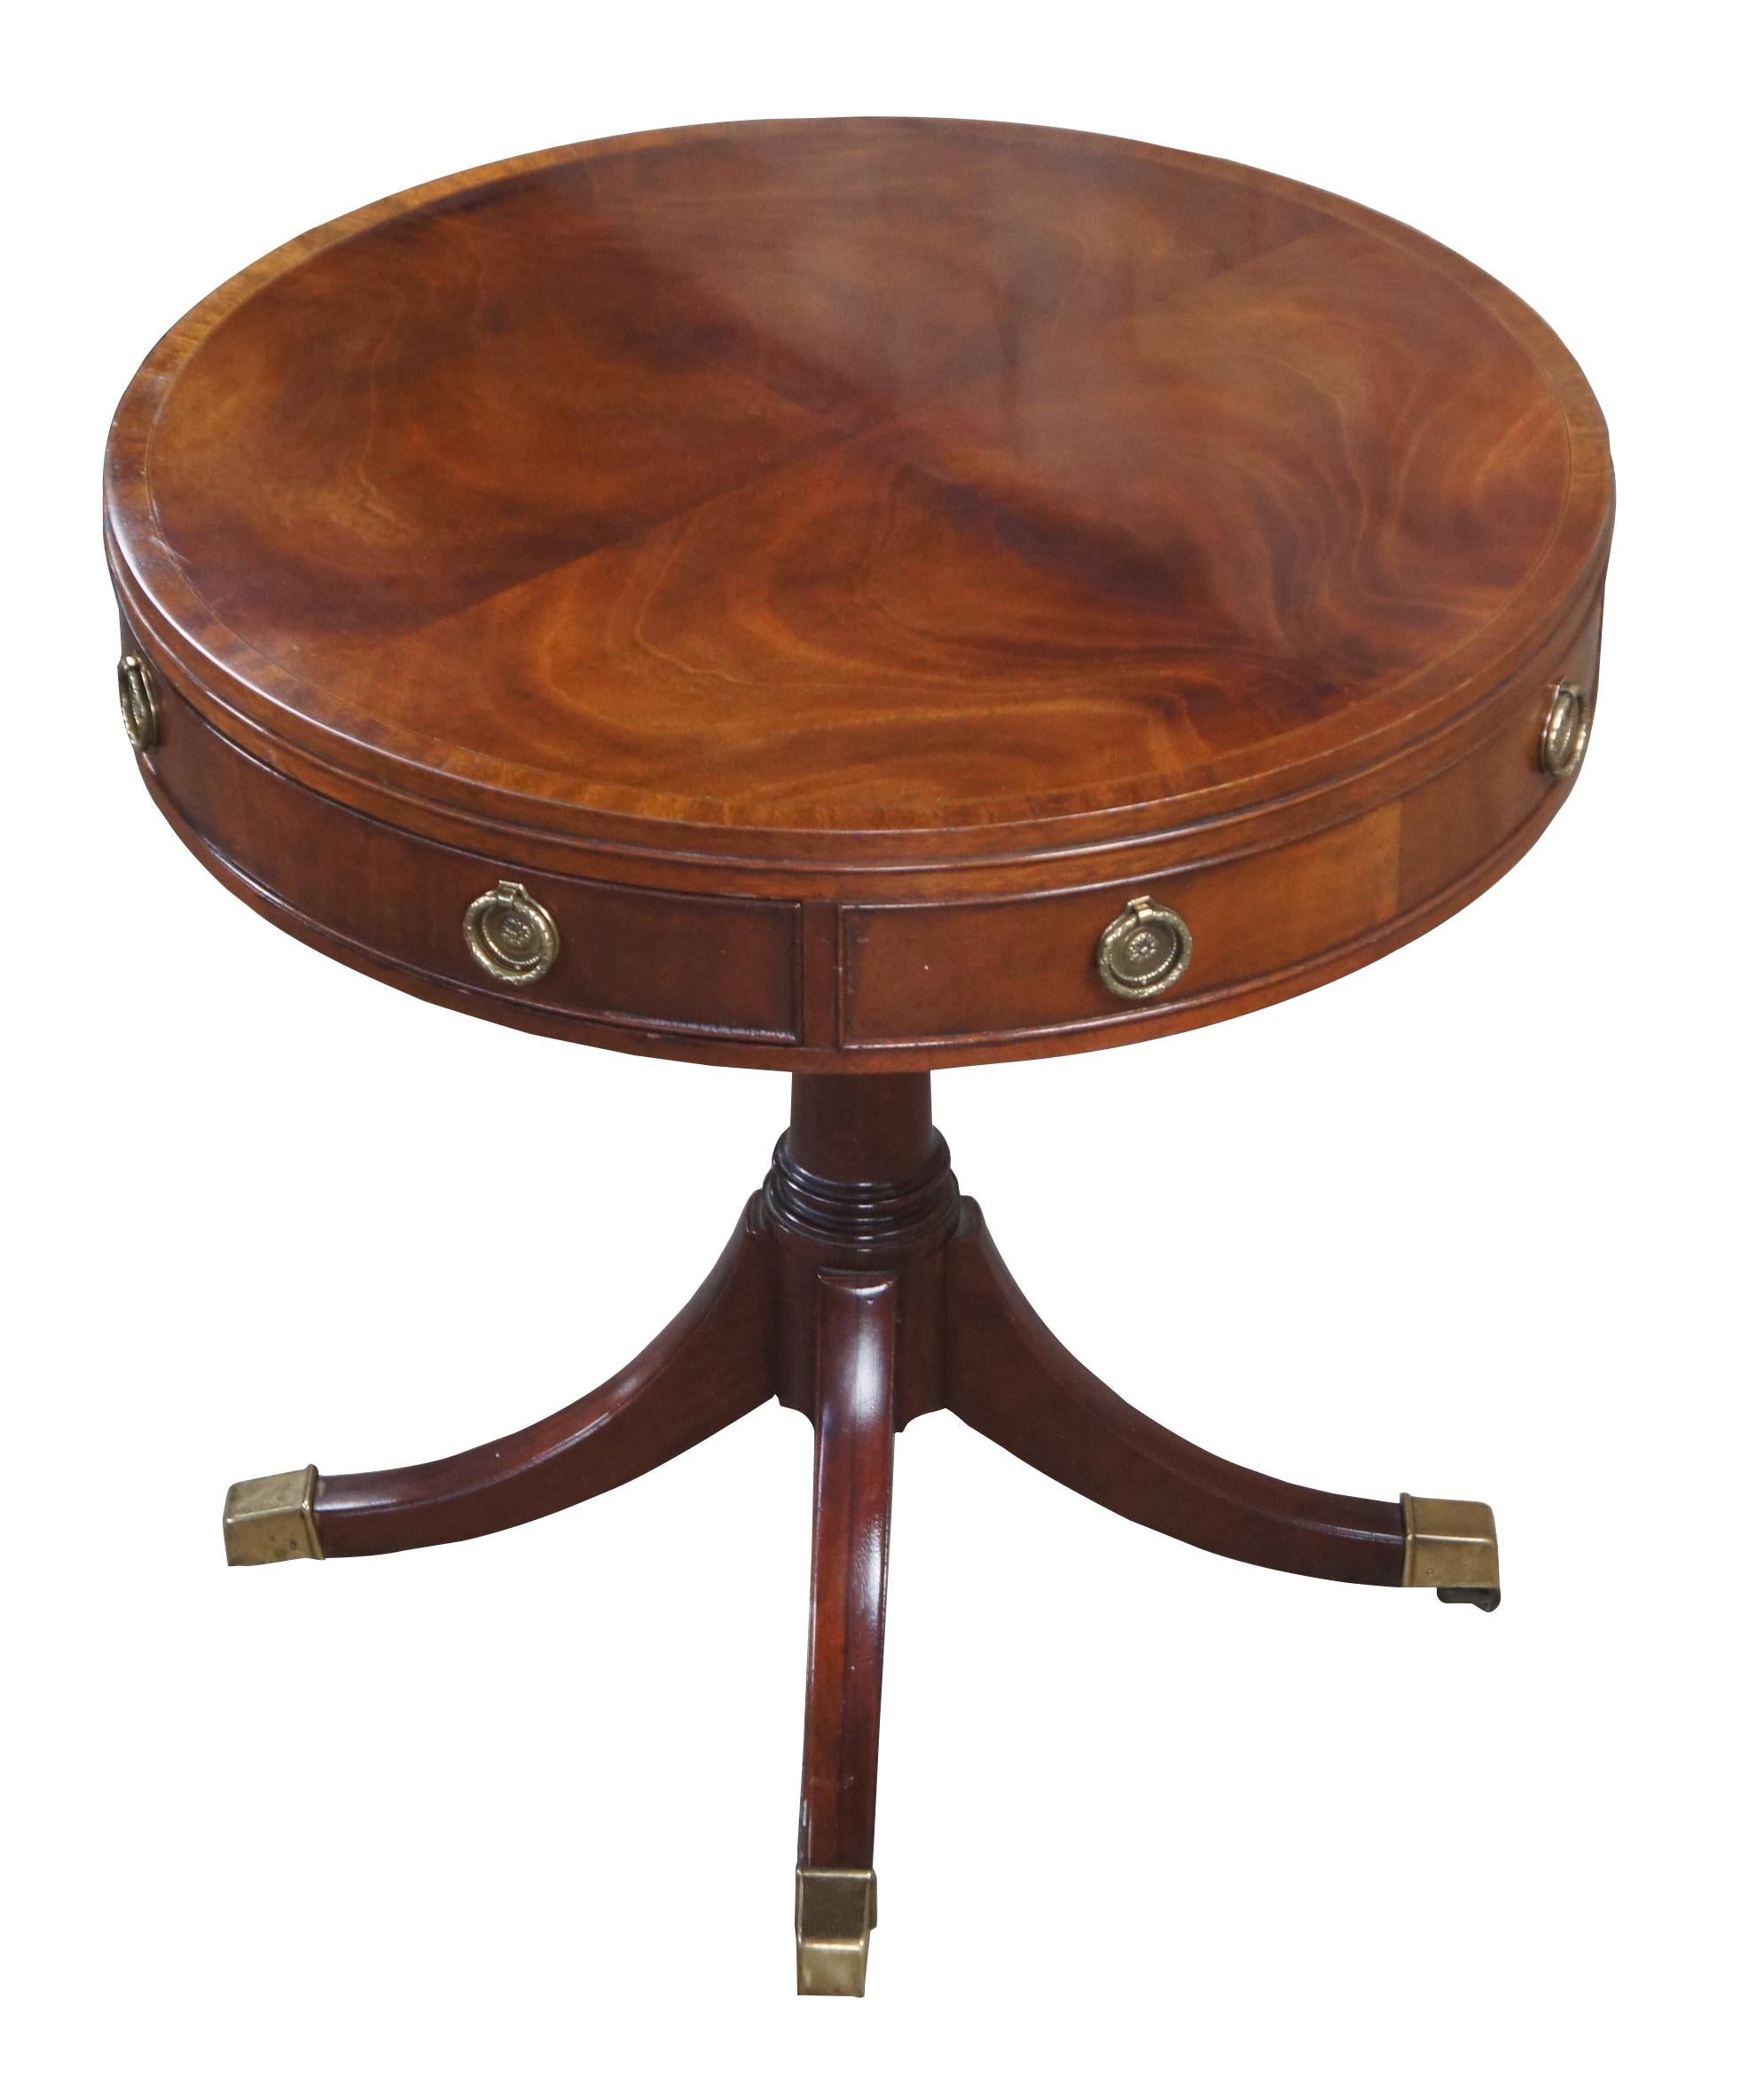 A gorgeous side or accent table by Baker Furniture, Circa last quarter 20th century. Drawing inspiration from English Georgian and Sheraton styling.  Made from mahogany with a matchbook banded and inlayed top.  The frieze features one dovetailed